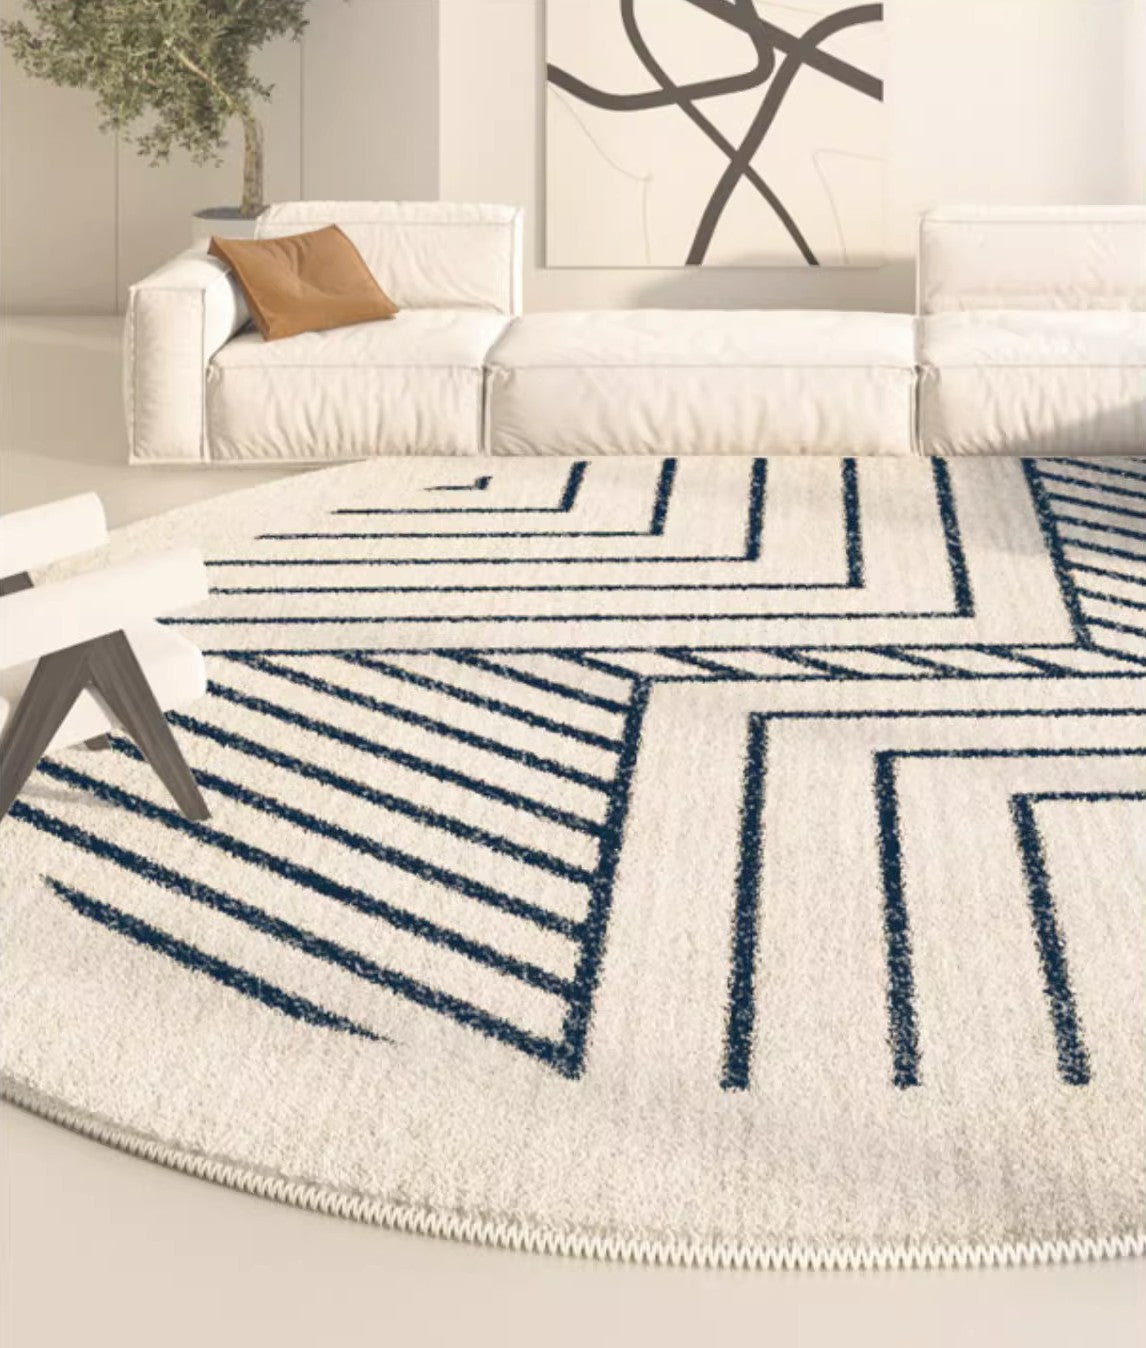 Contemporary Round Rugs for Dining Room, Abstract Round Rugs Next to Bedroom, Geometric Modern Rug Ideas under Coffee Table